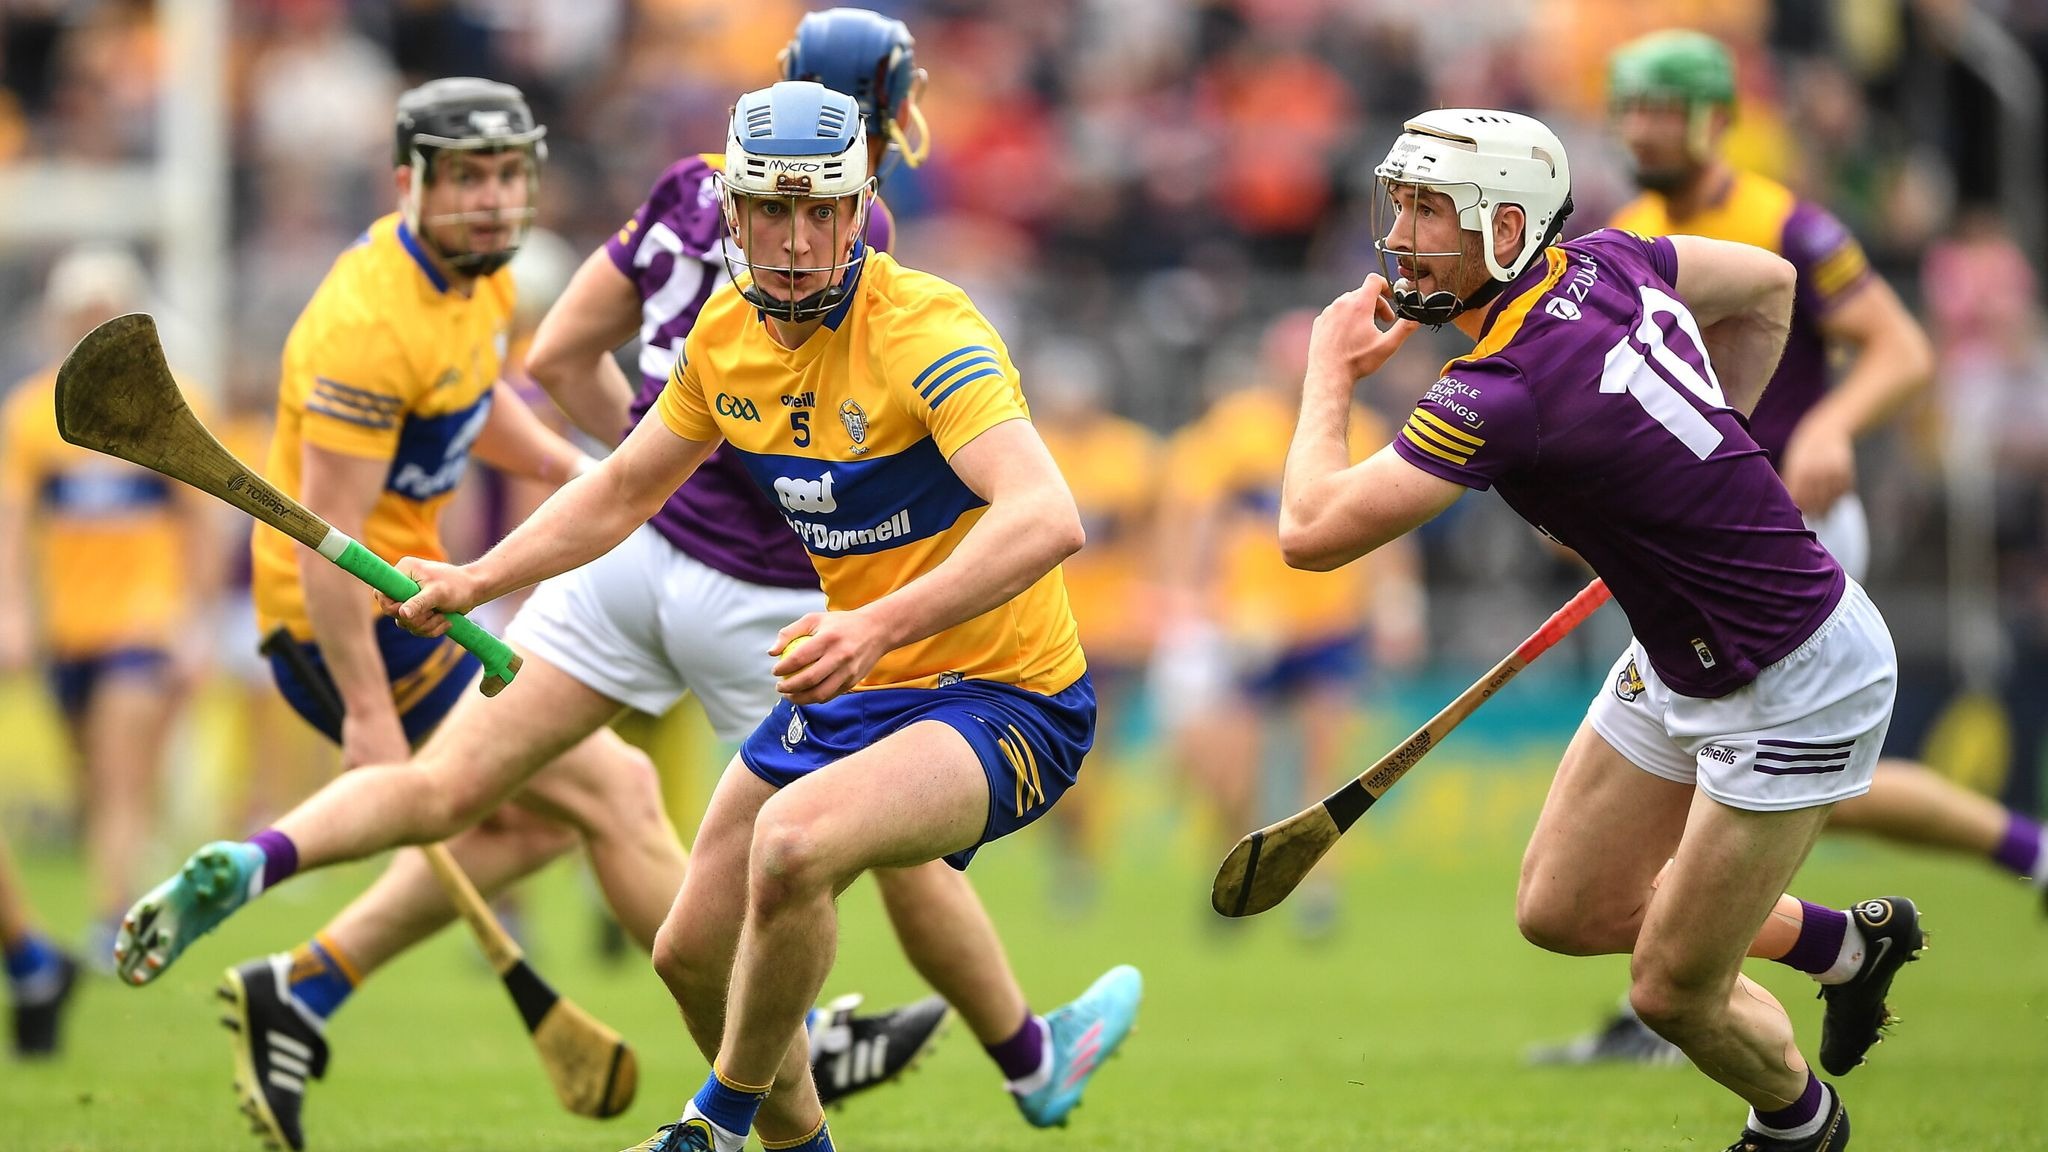 What is Hurling Learn More About Playing Hurling. Hurling is the national sport of Ireland and is estimated to be over 3,000 years old.